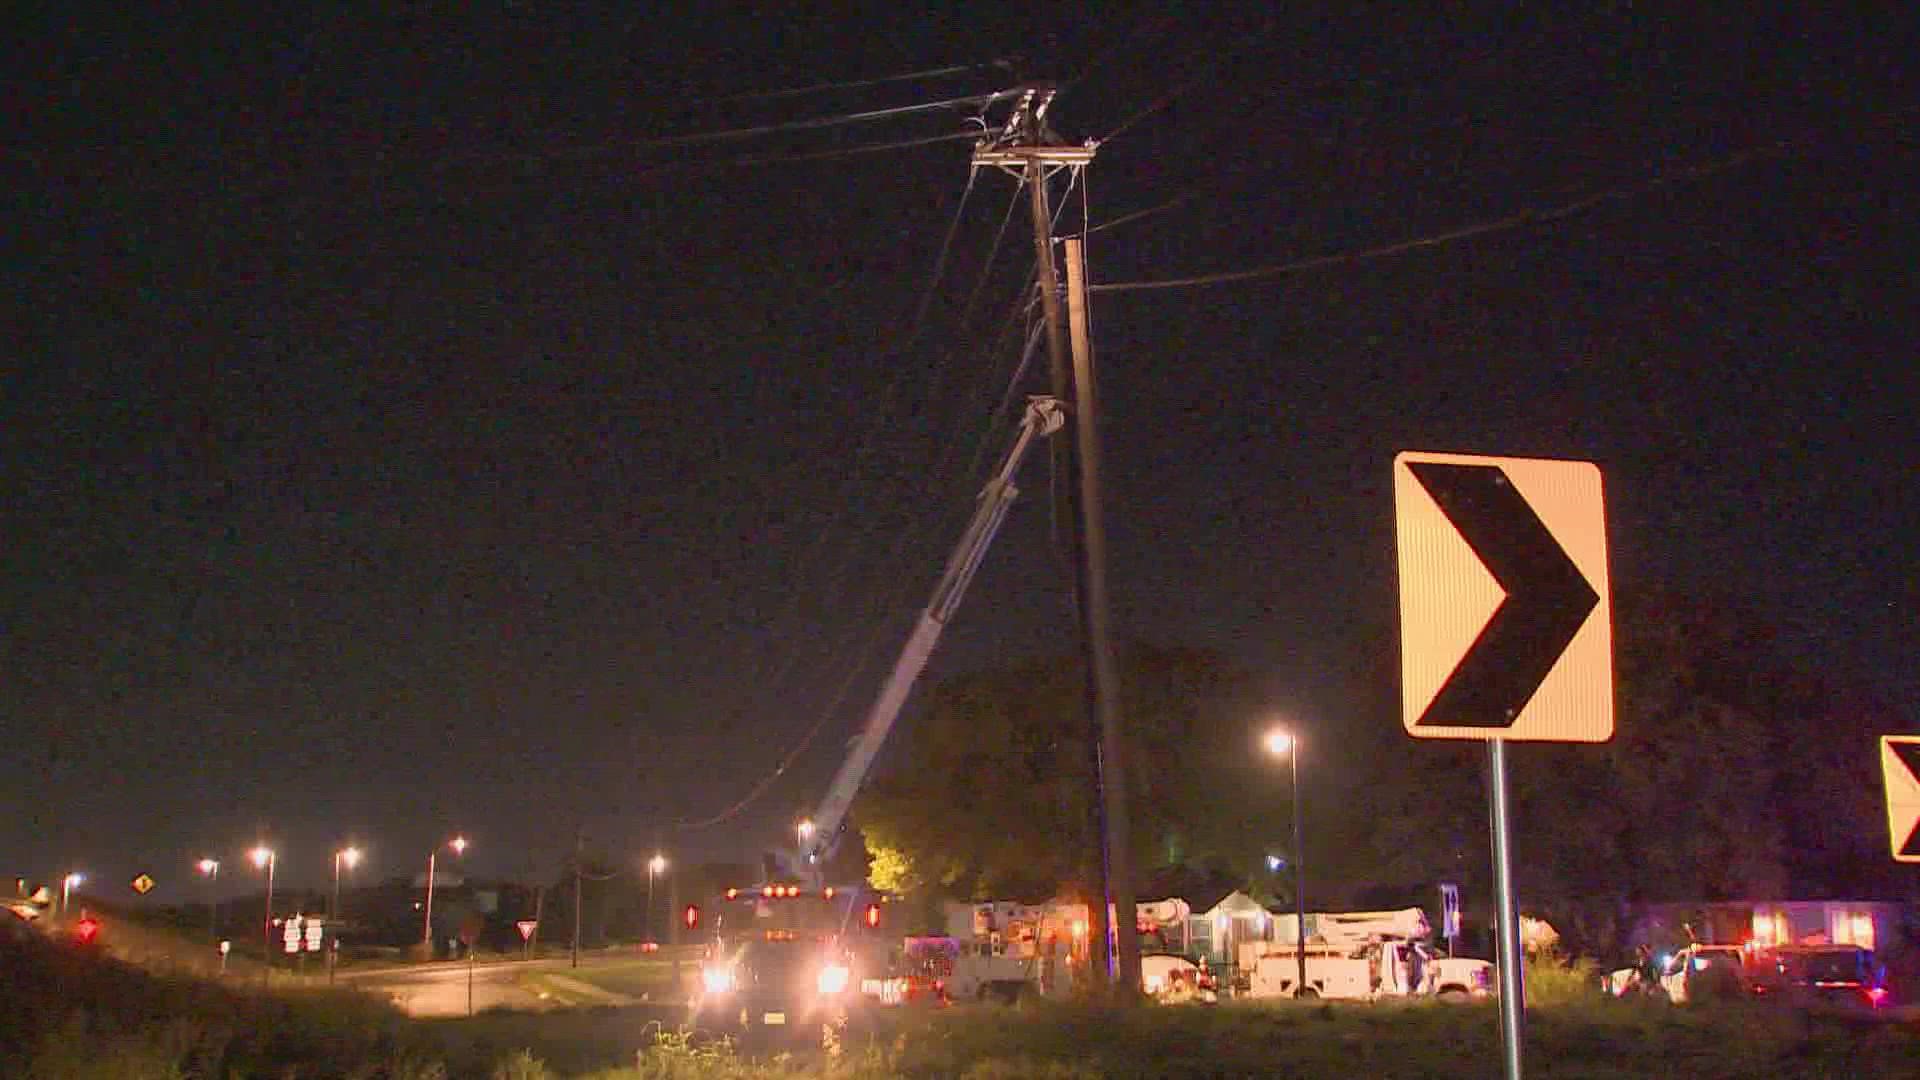 Fort Worth police said the pole was hit at about 11:30 p.m. last night near the intersection of U.S. 287 and Wilbarger Street.